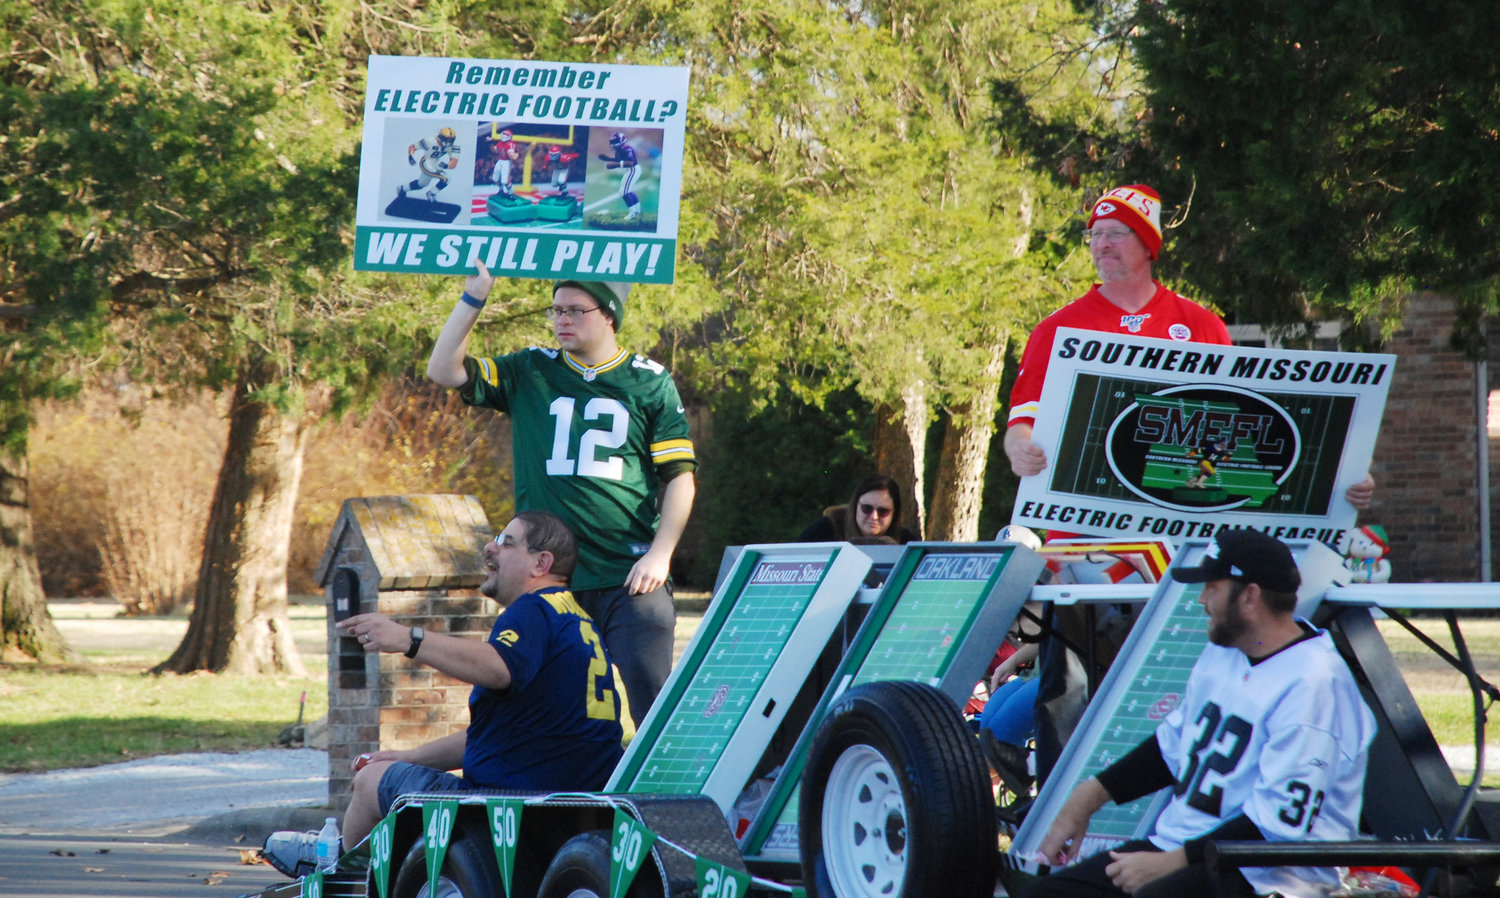 MEMBERS OF THE SOUTHERN MISSOURI ELECTRIC FOOTBALL LEAGUE celebrated their game by showing off their boards in the Nixa Christmas Parade. The group plays its games in Nixa, with playoffs set to begin in January.